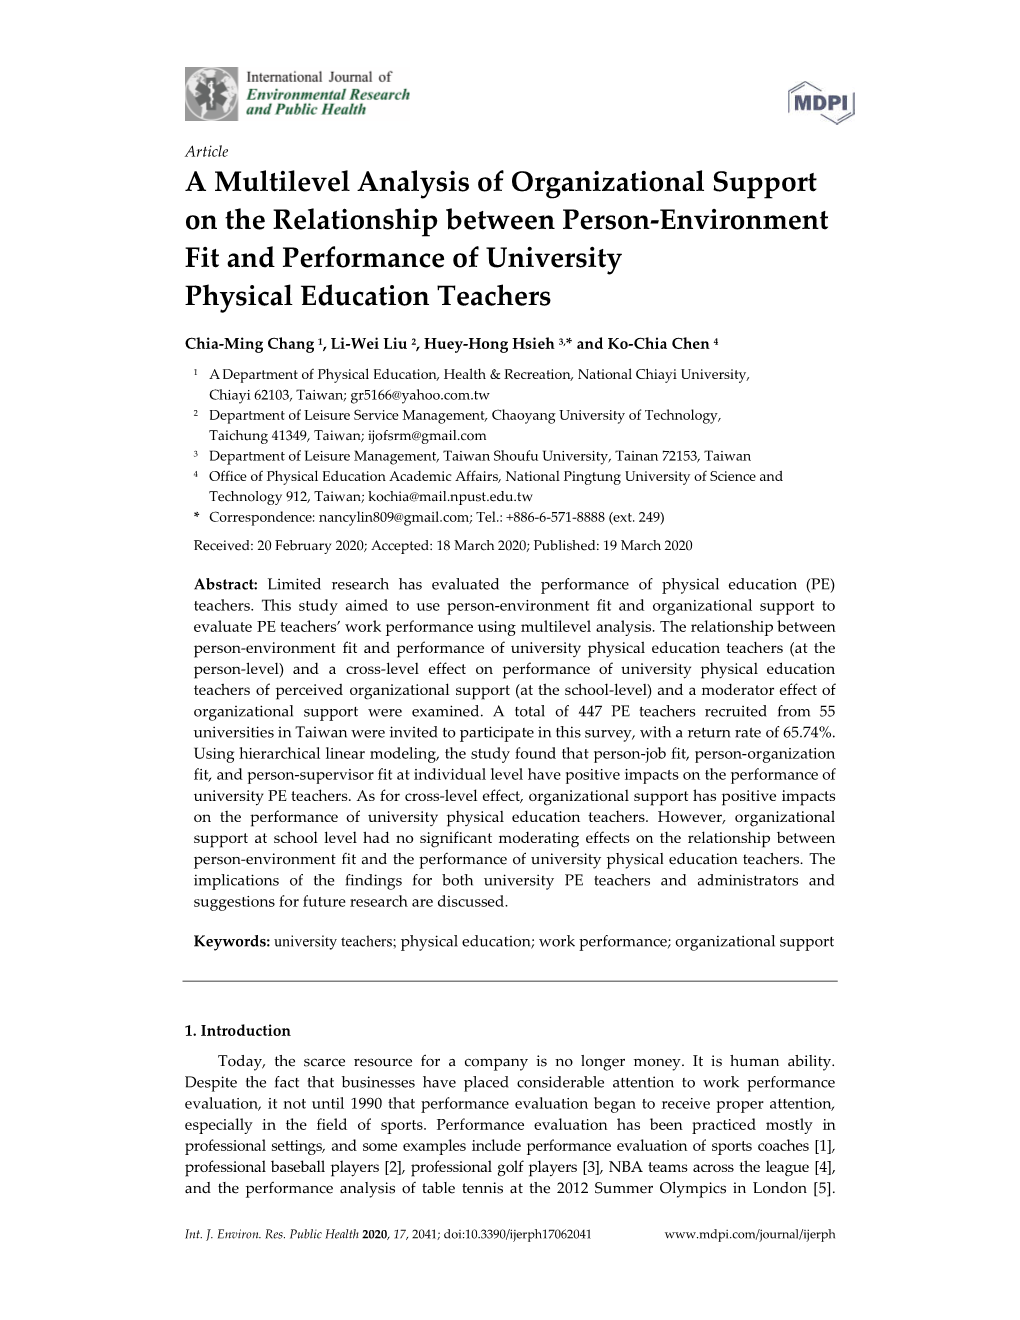 A Multilevel Analysis of Organizational Support on the Relationship Between Person-Environment Fit and Performance of University Physical Education Teachers